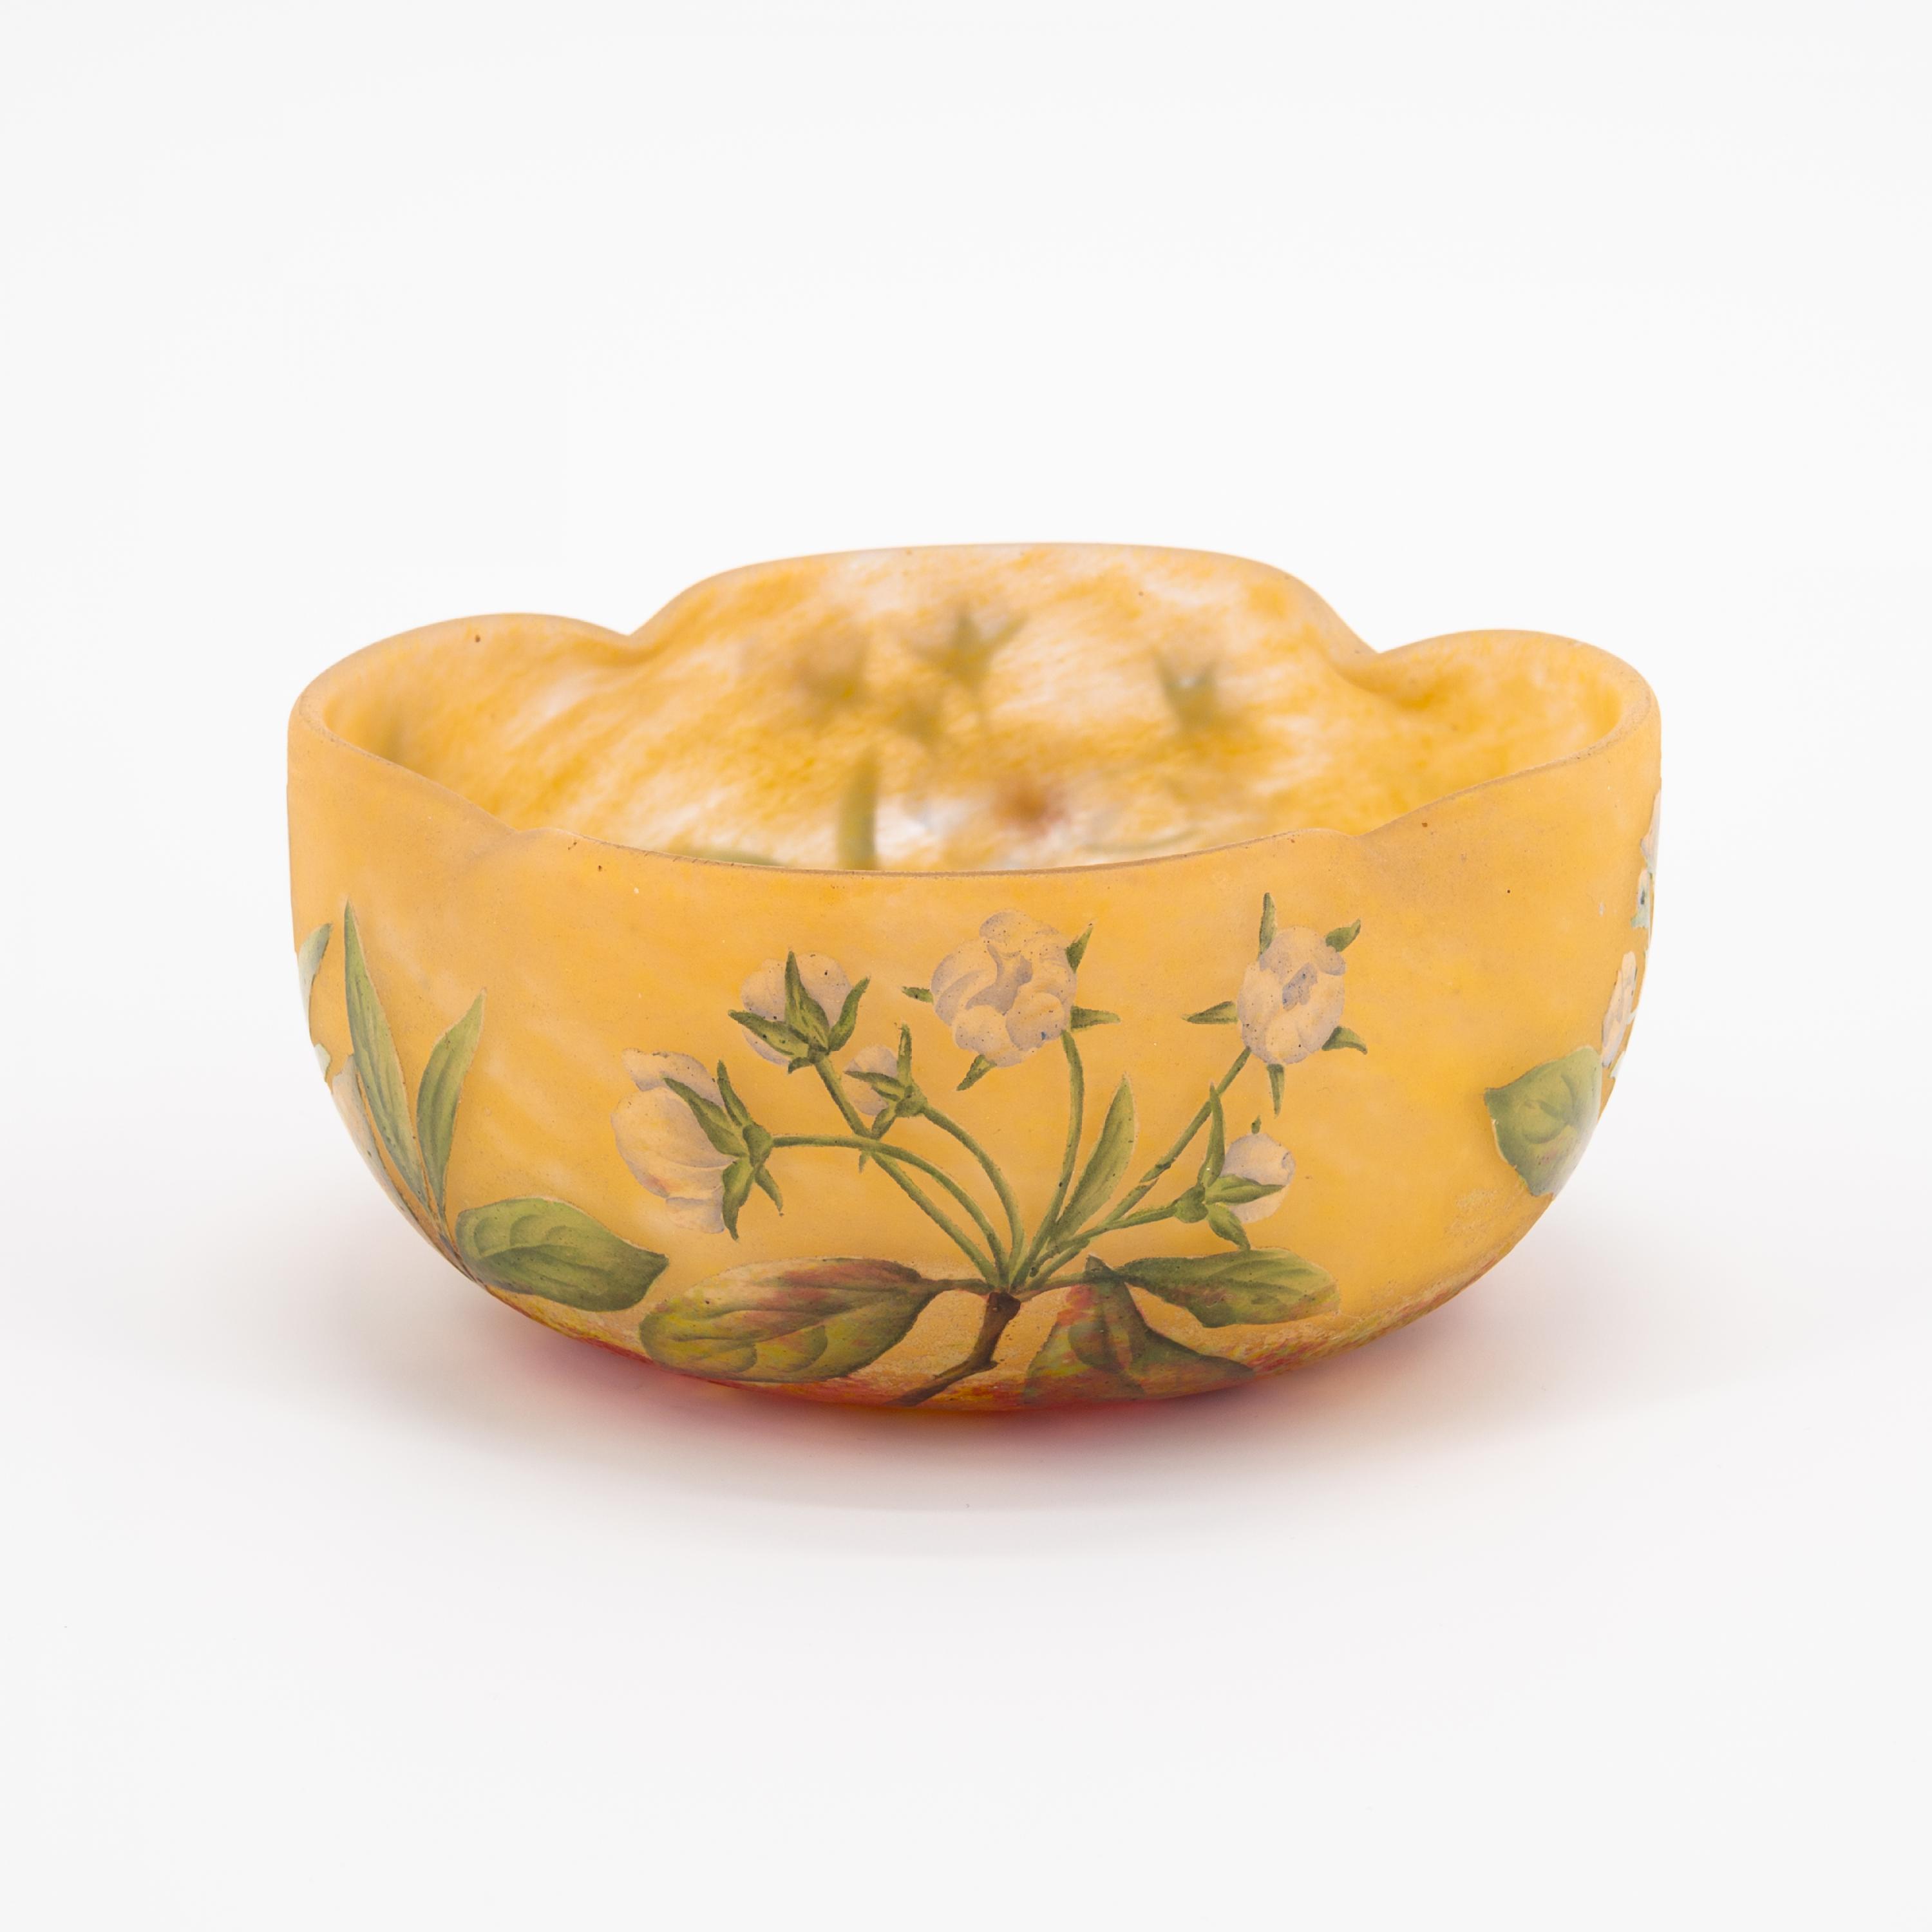 SMALL SCALLOPED GLASS BOWL WITH CHERRY BLOSSOM BRANCHES - Image 2 of 6